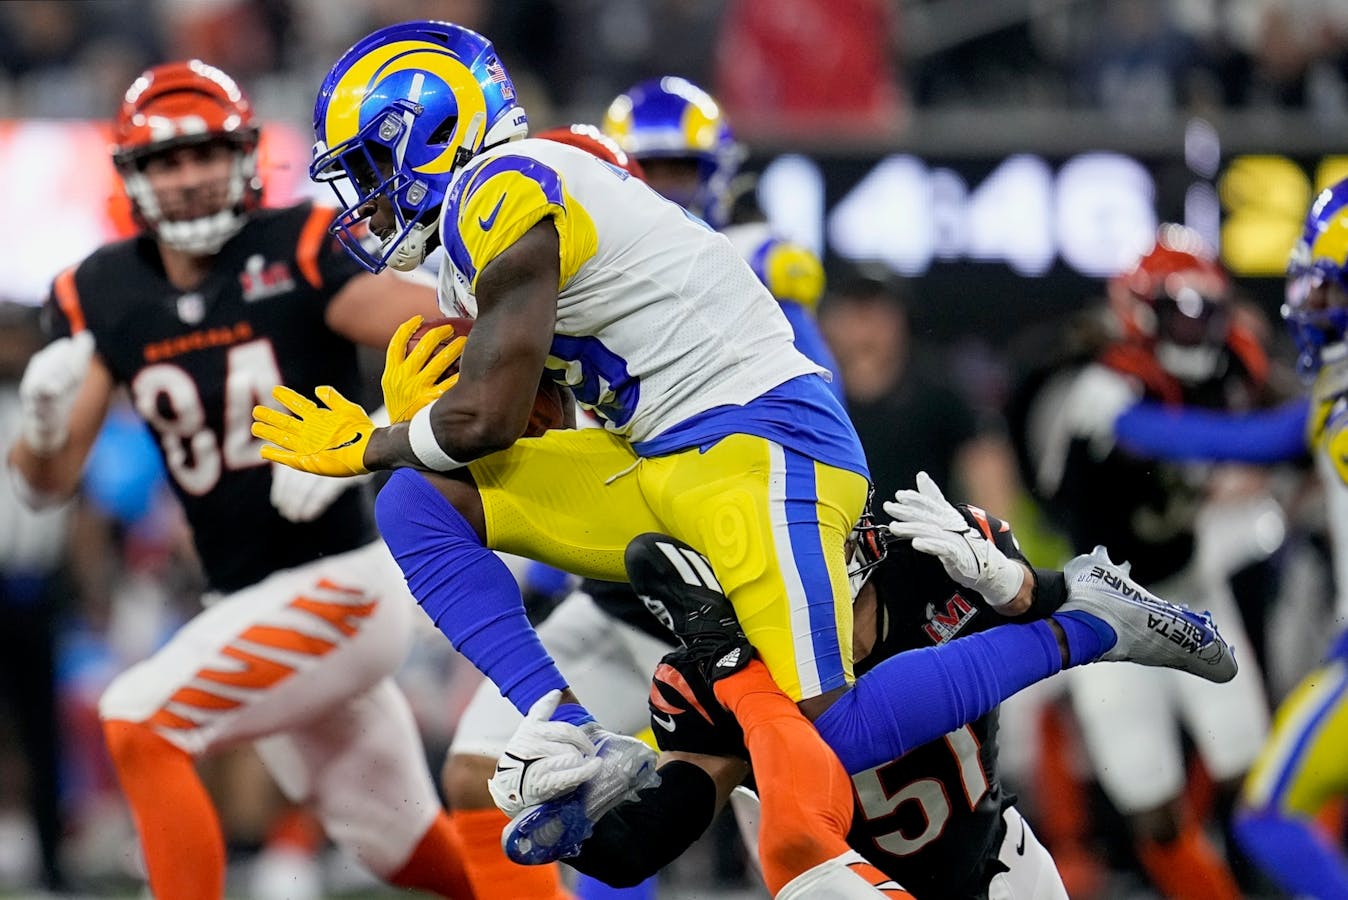 Los Angeles Rams wide receiver Brandon Powell carries the ball against the Cincinnati Bengals during the second half of the NFL Super Bowl 56 football game Sunday. Photo: AP